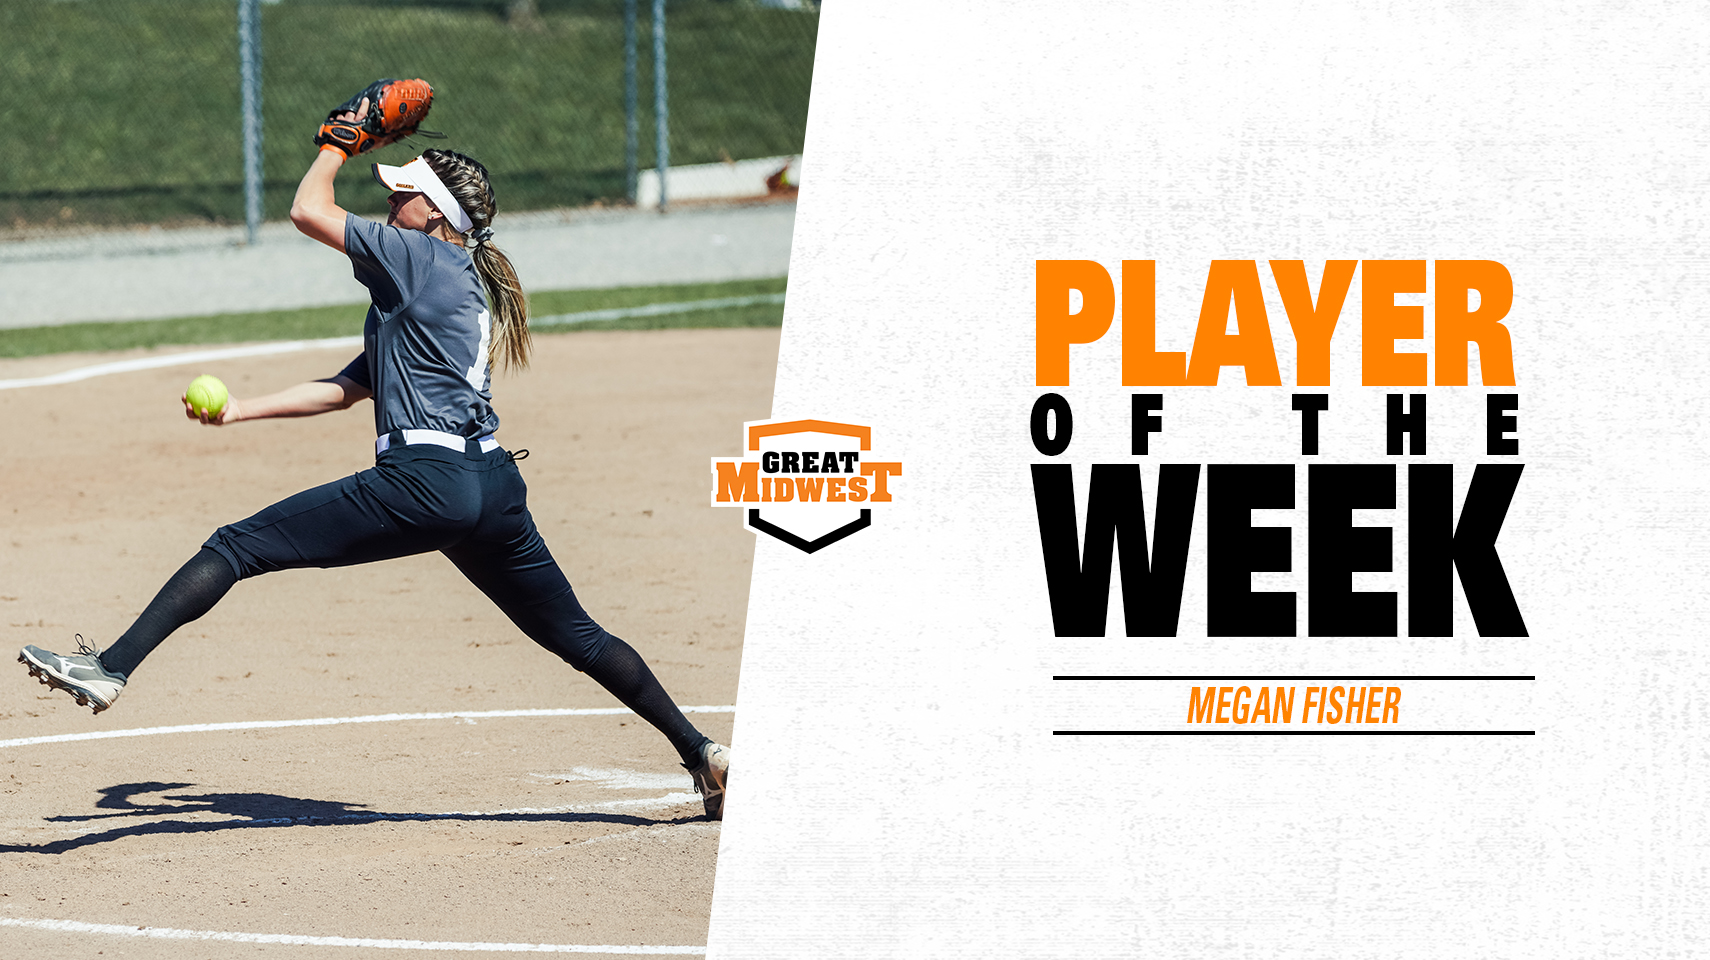 Softball Pitcher of the Week